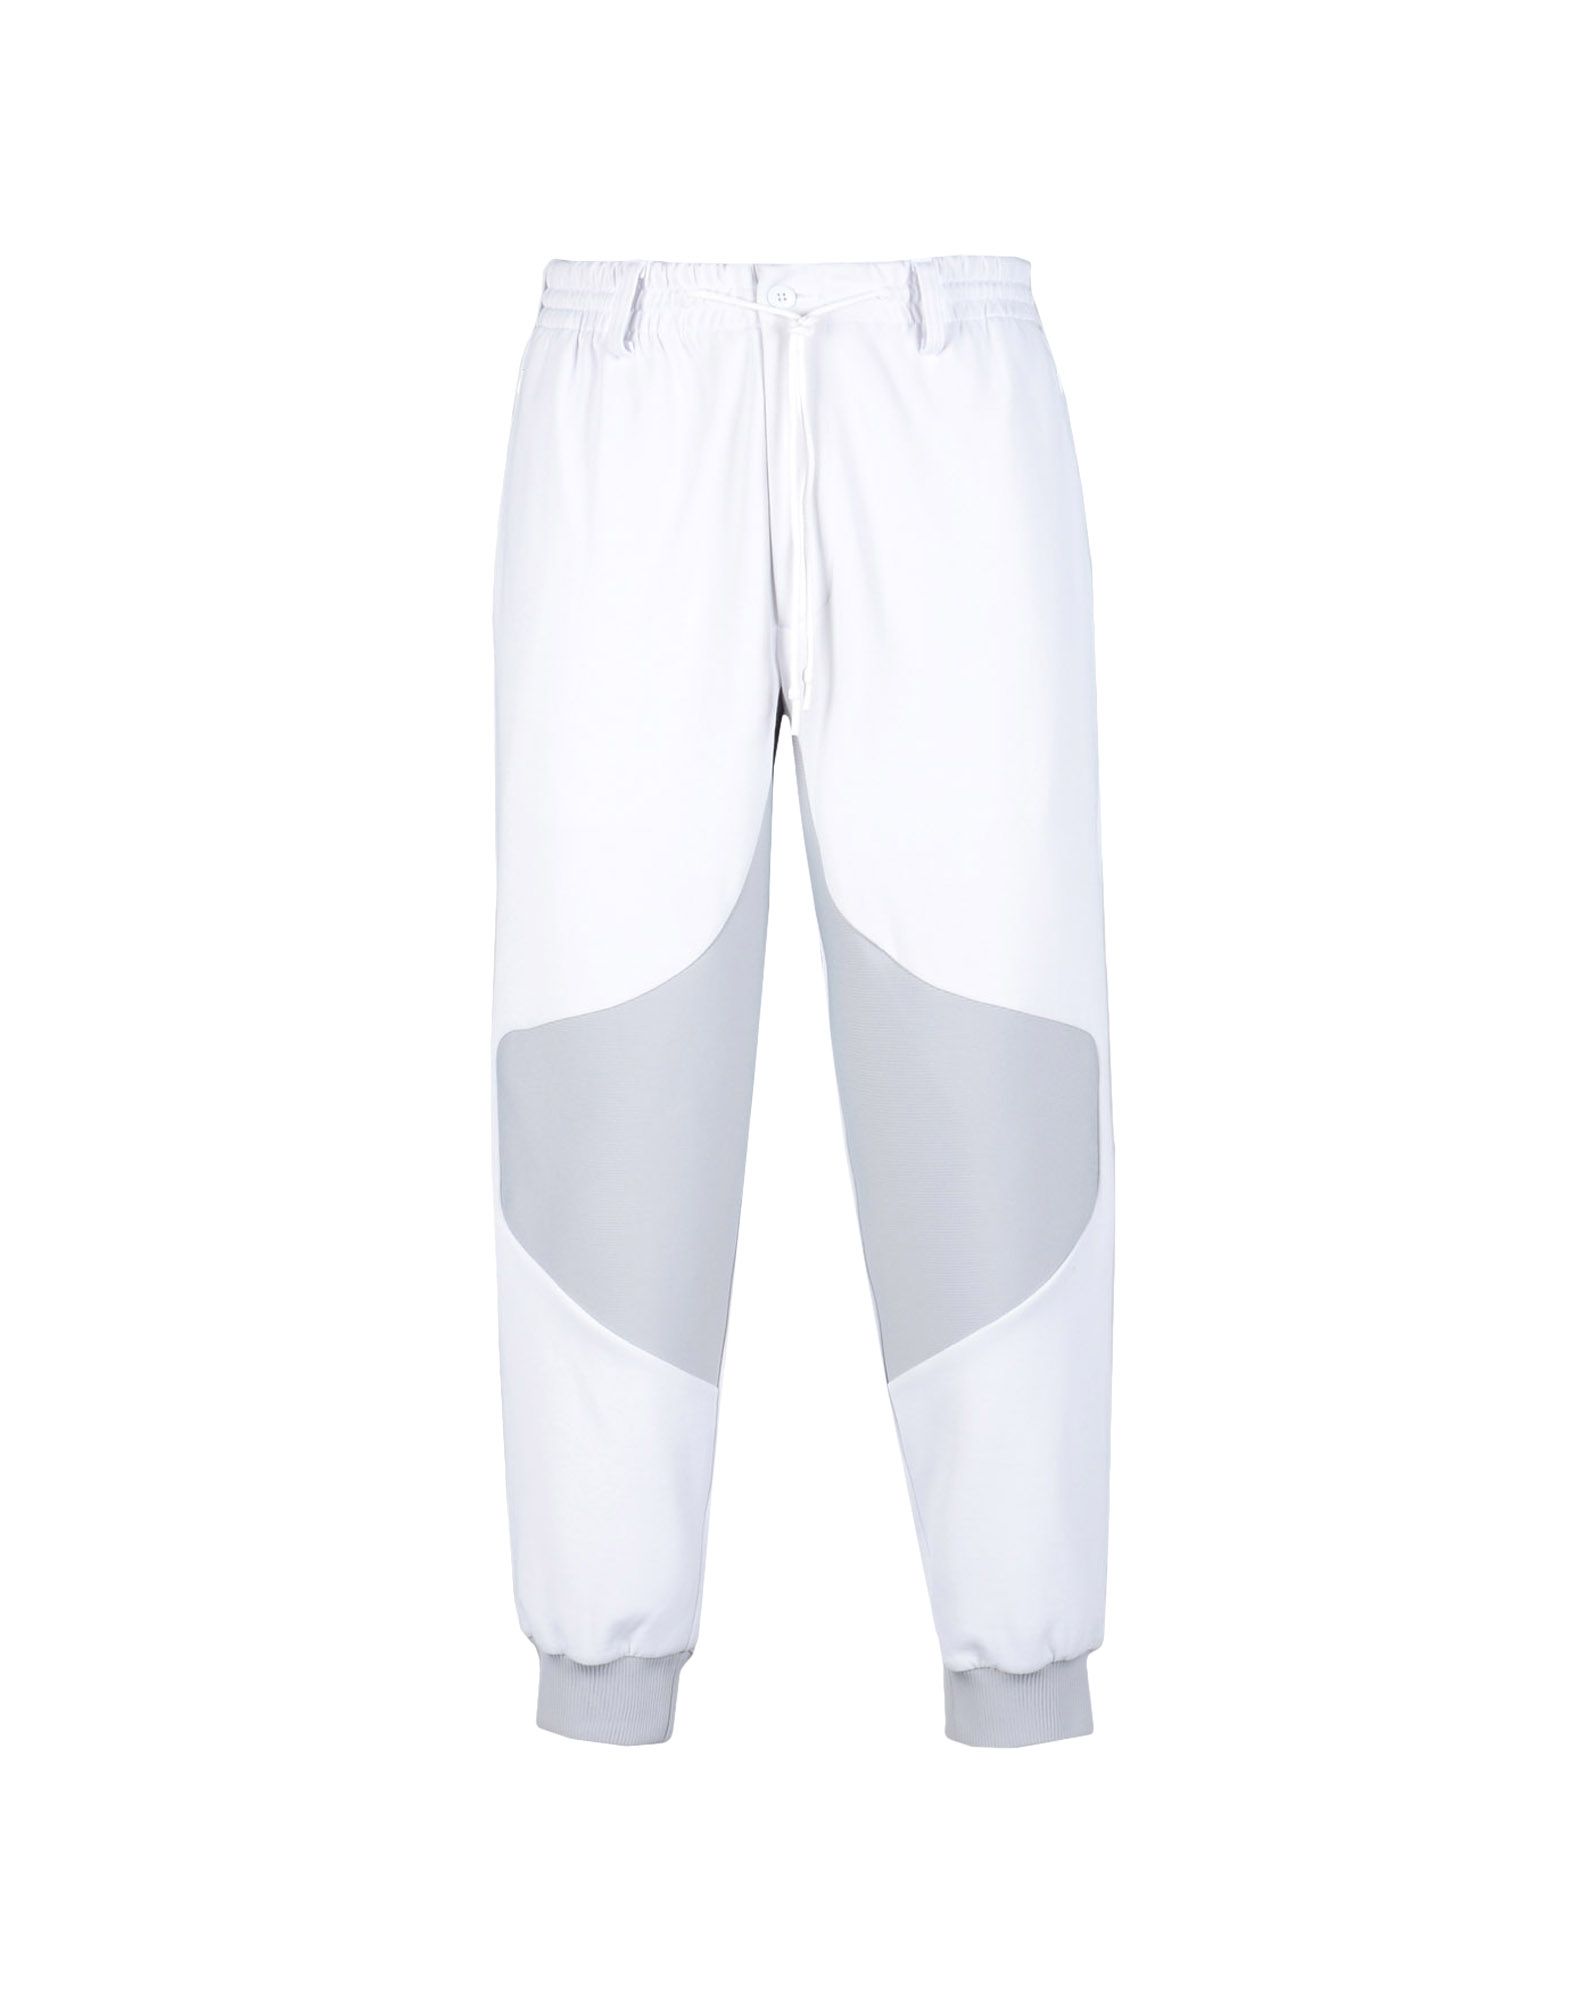 Y 3 CORE TRACK PANT for Men | Adidas Y-3 Official Store